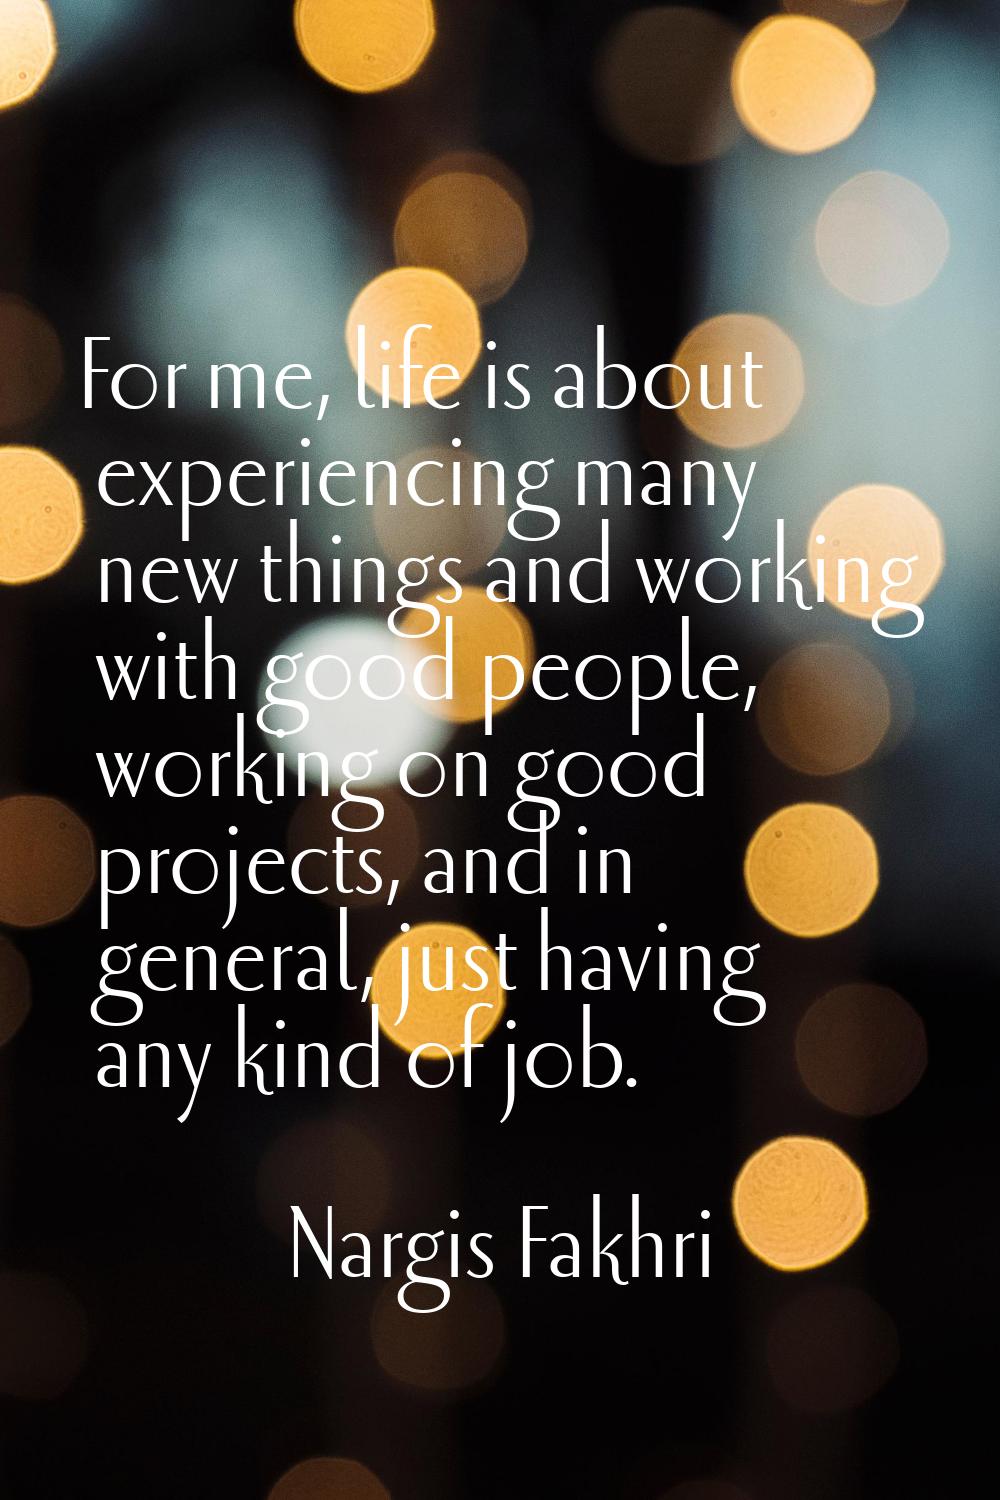 For me, life is about experiencing many new things and working with good people, working on good pr